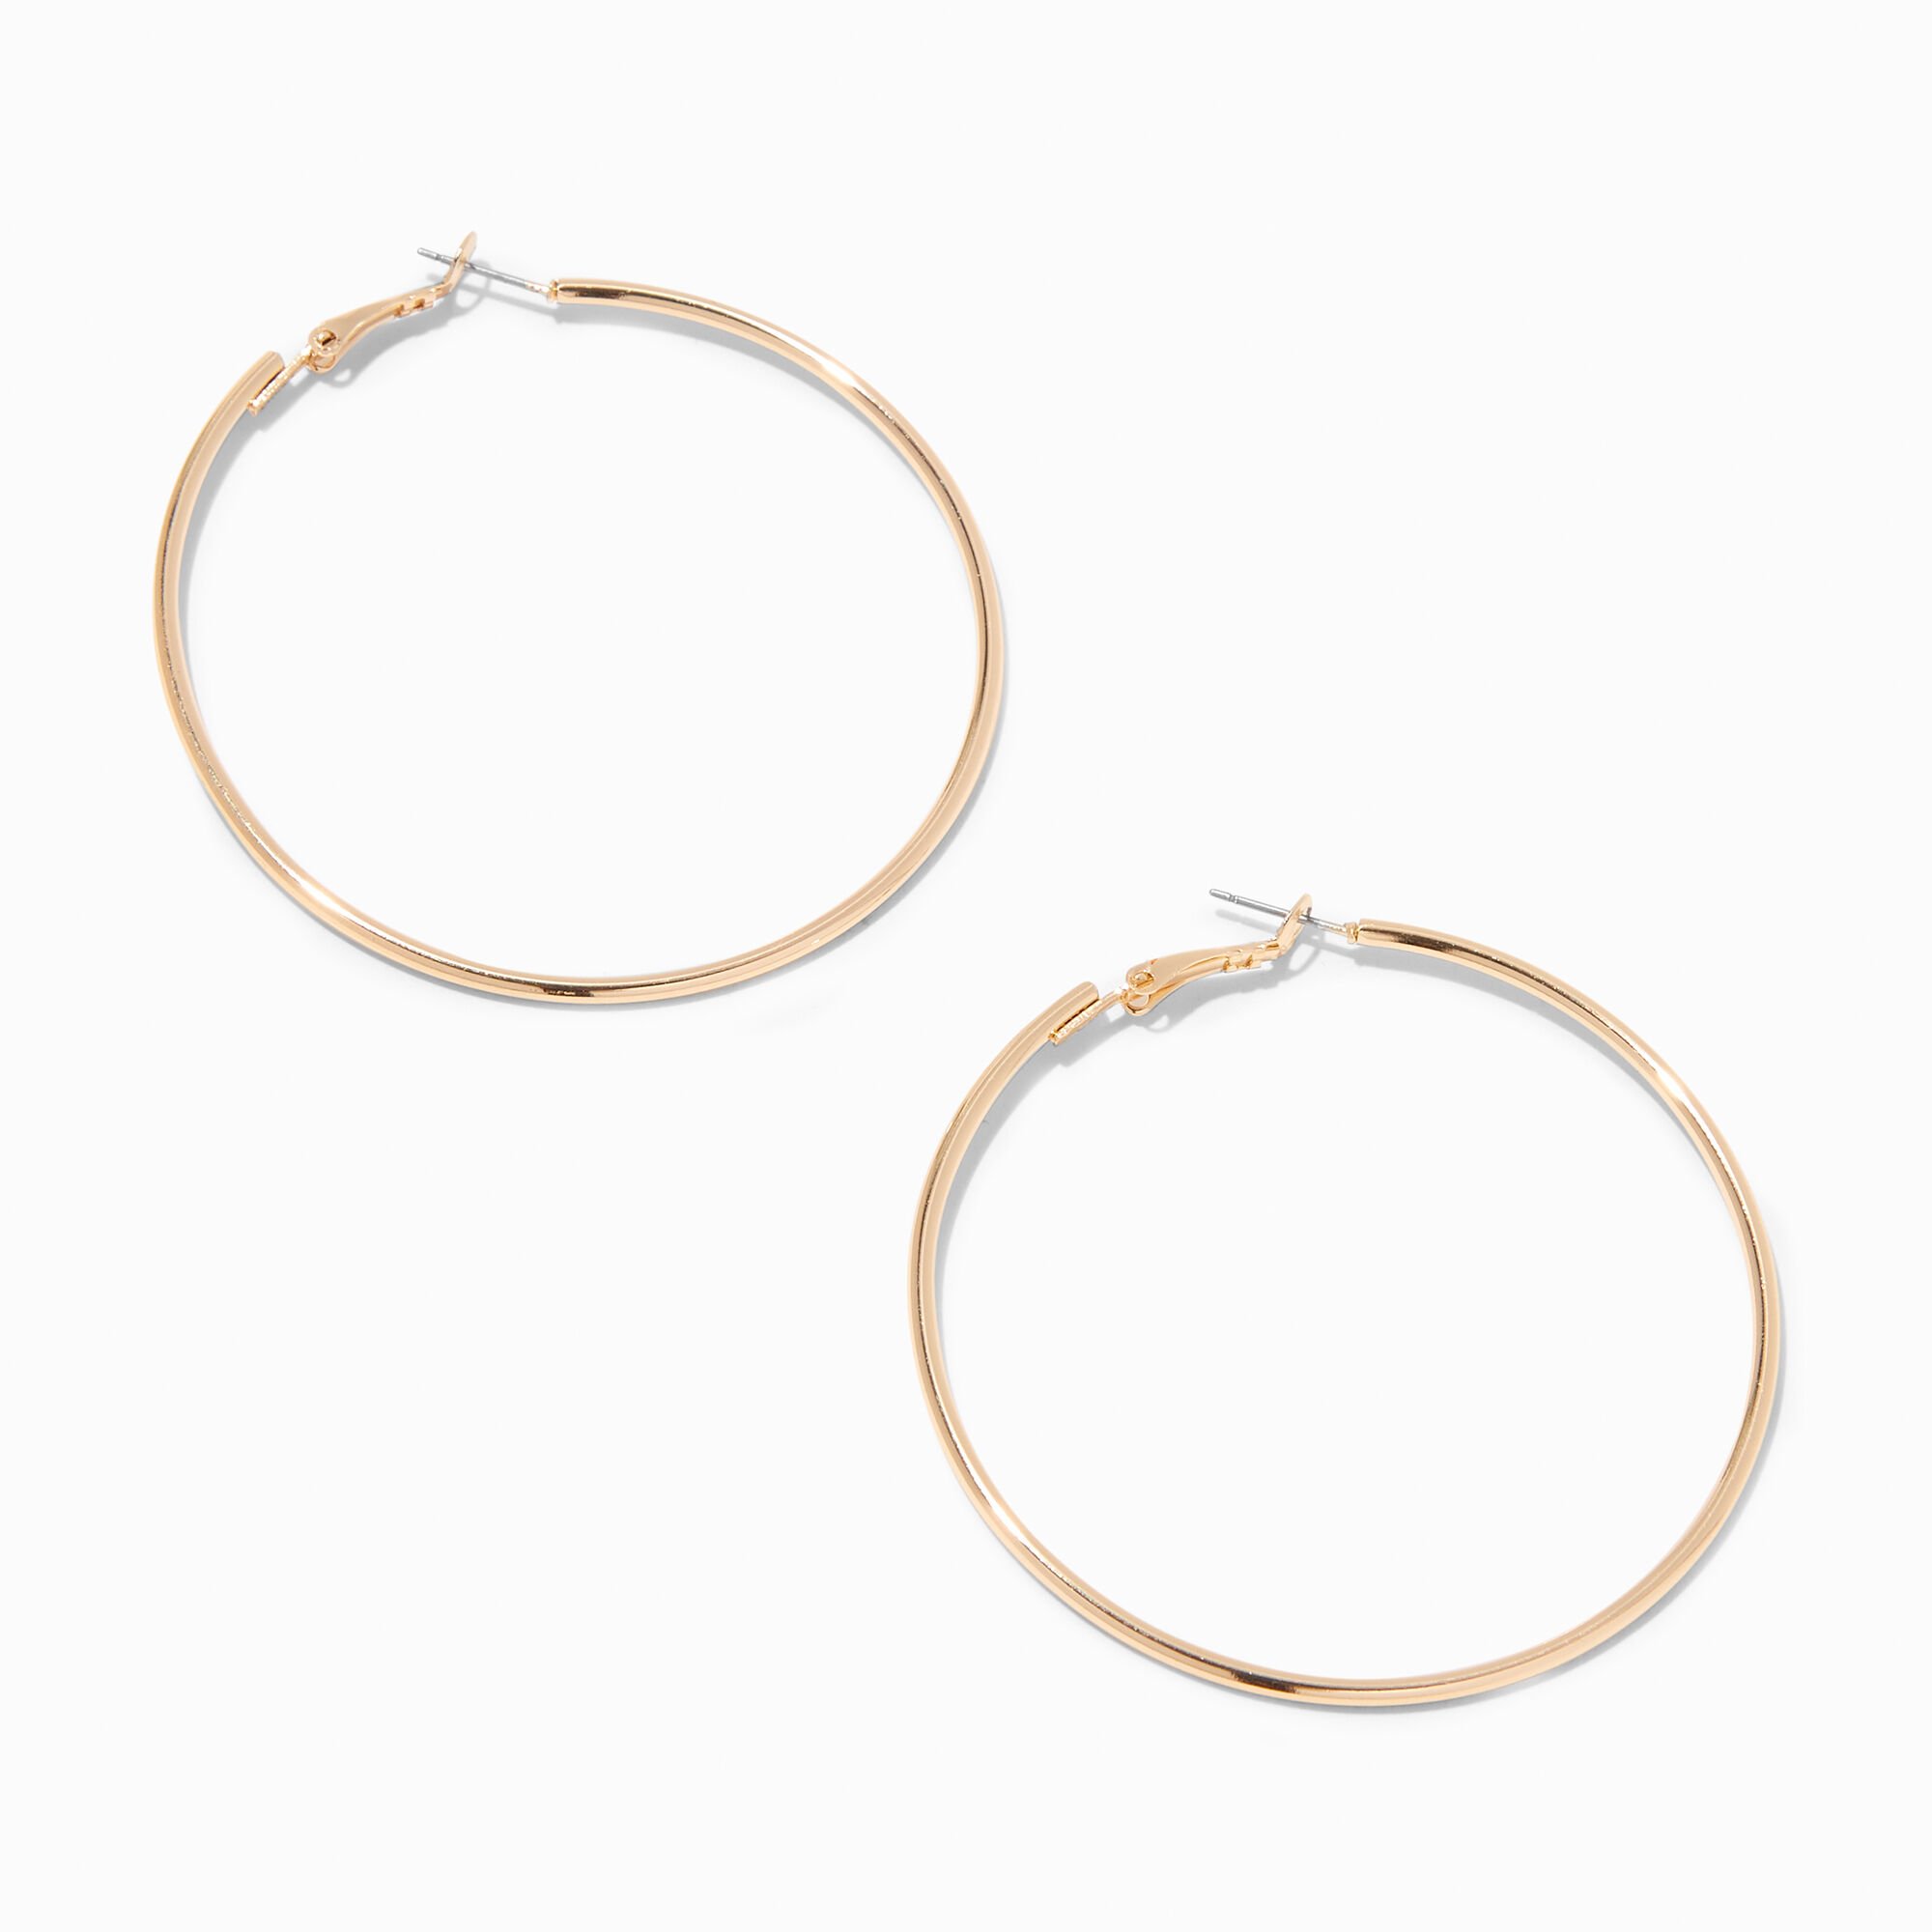 View Claires Recycled Jewelry Tone 60MM Hoop Earrings Gold information